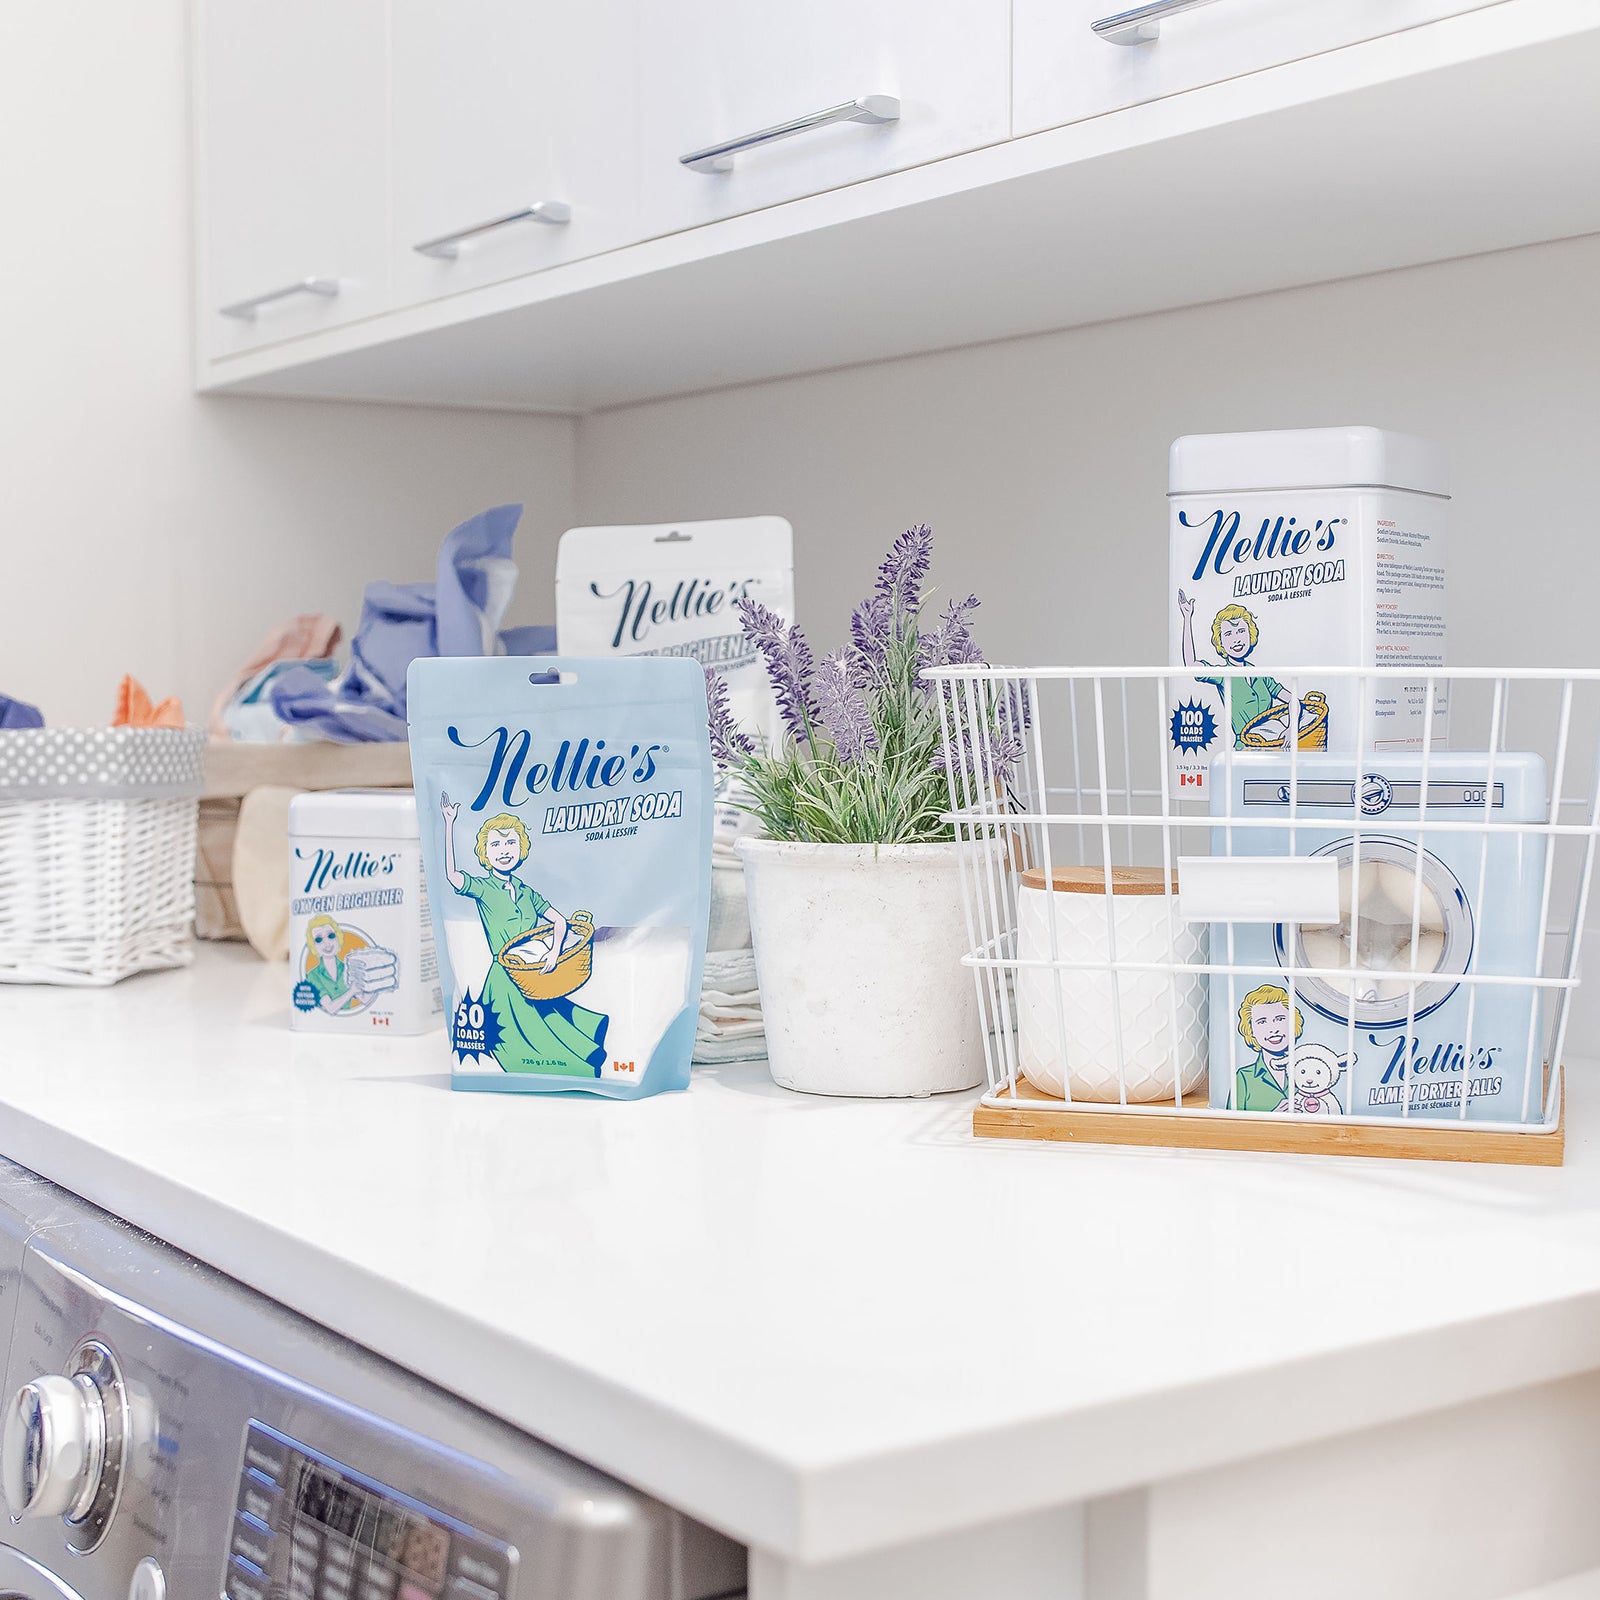 A Laundry Shelf on which all Nellie's Laundry Soda products are kept